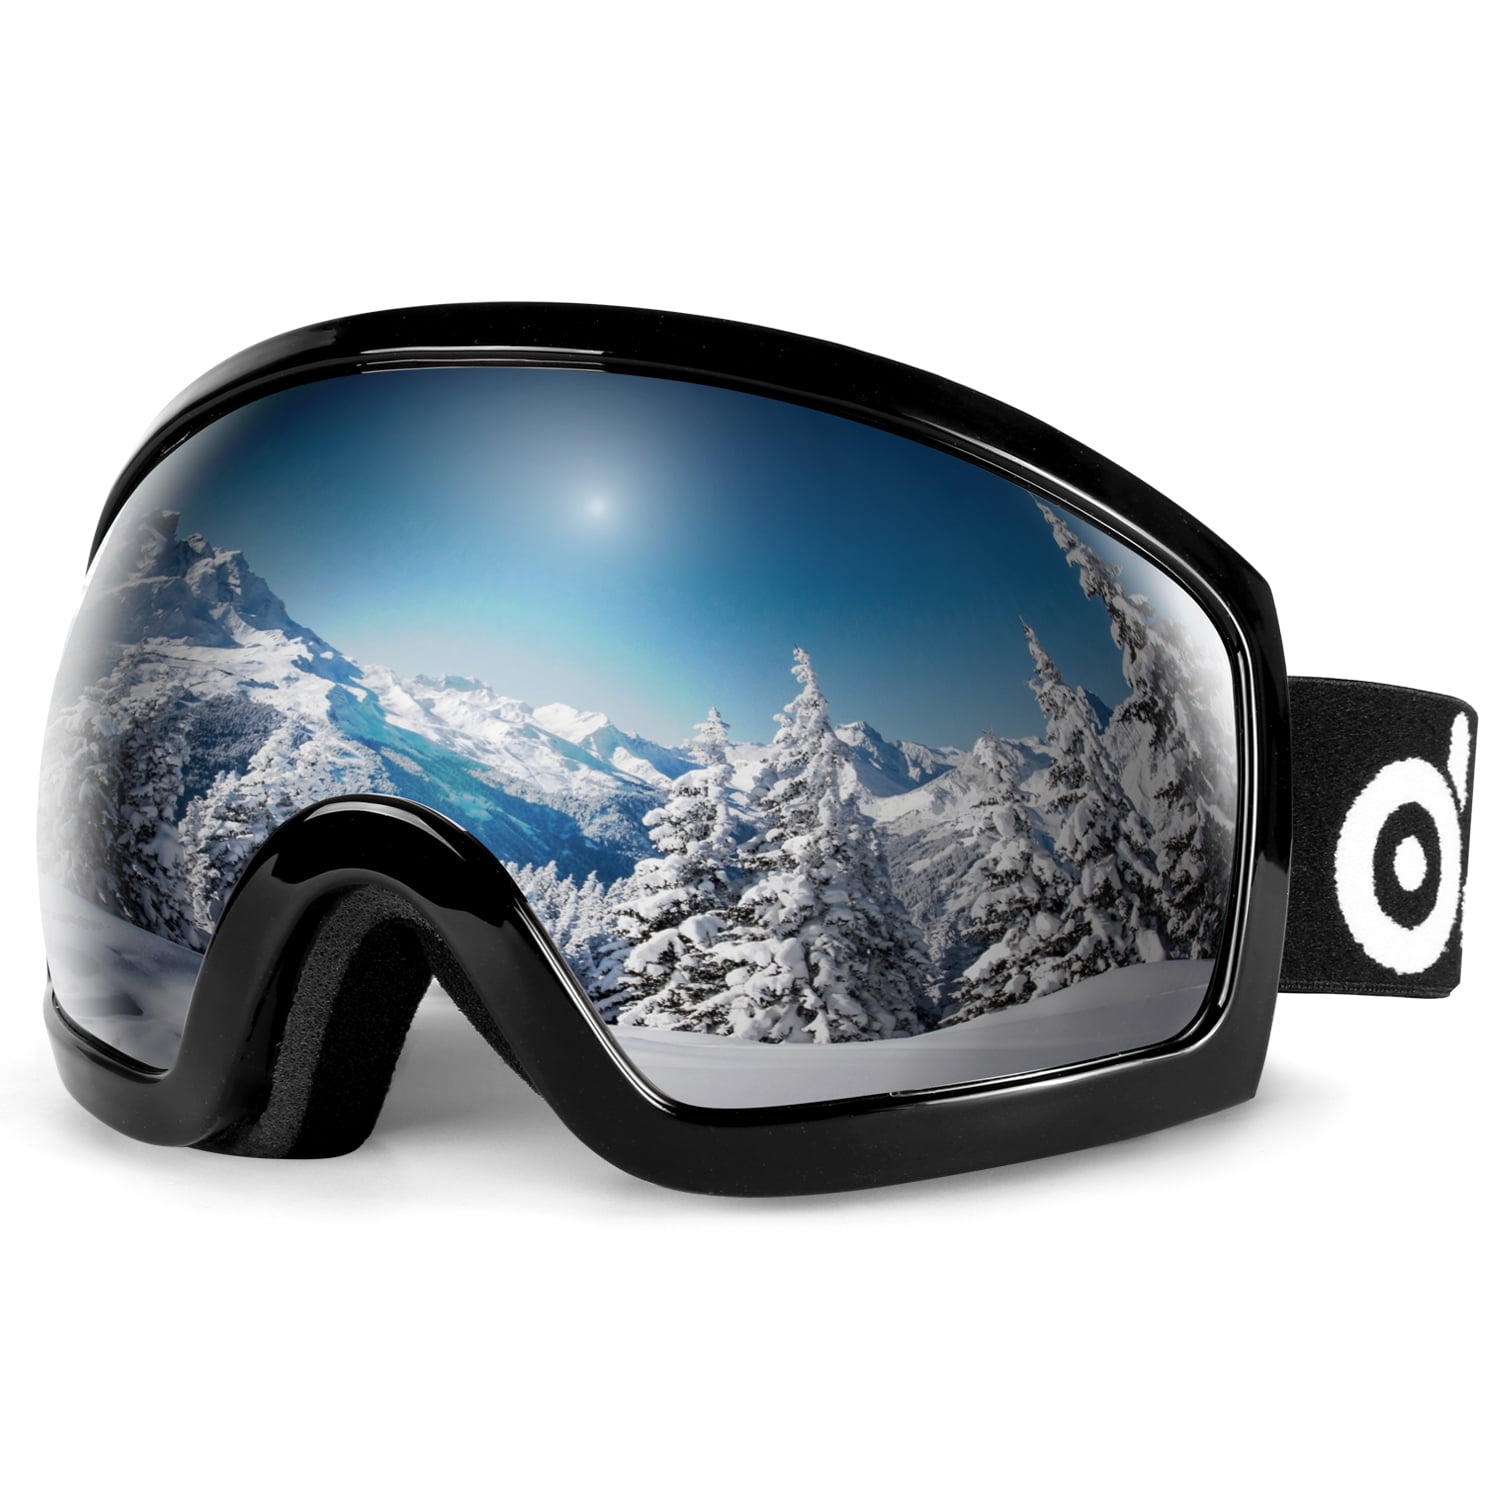 Ski Snow Goggles Snowboarding Anti-Fog Lens 100% UV400 Protection Adults & Youth 